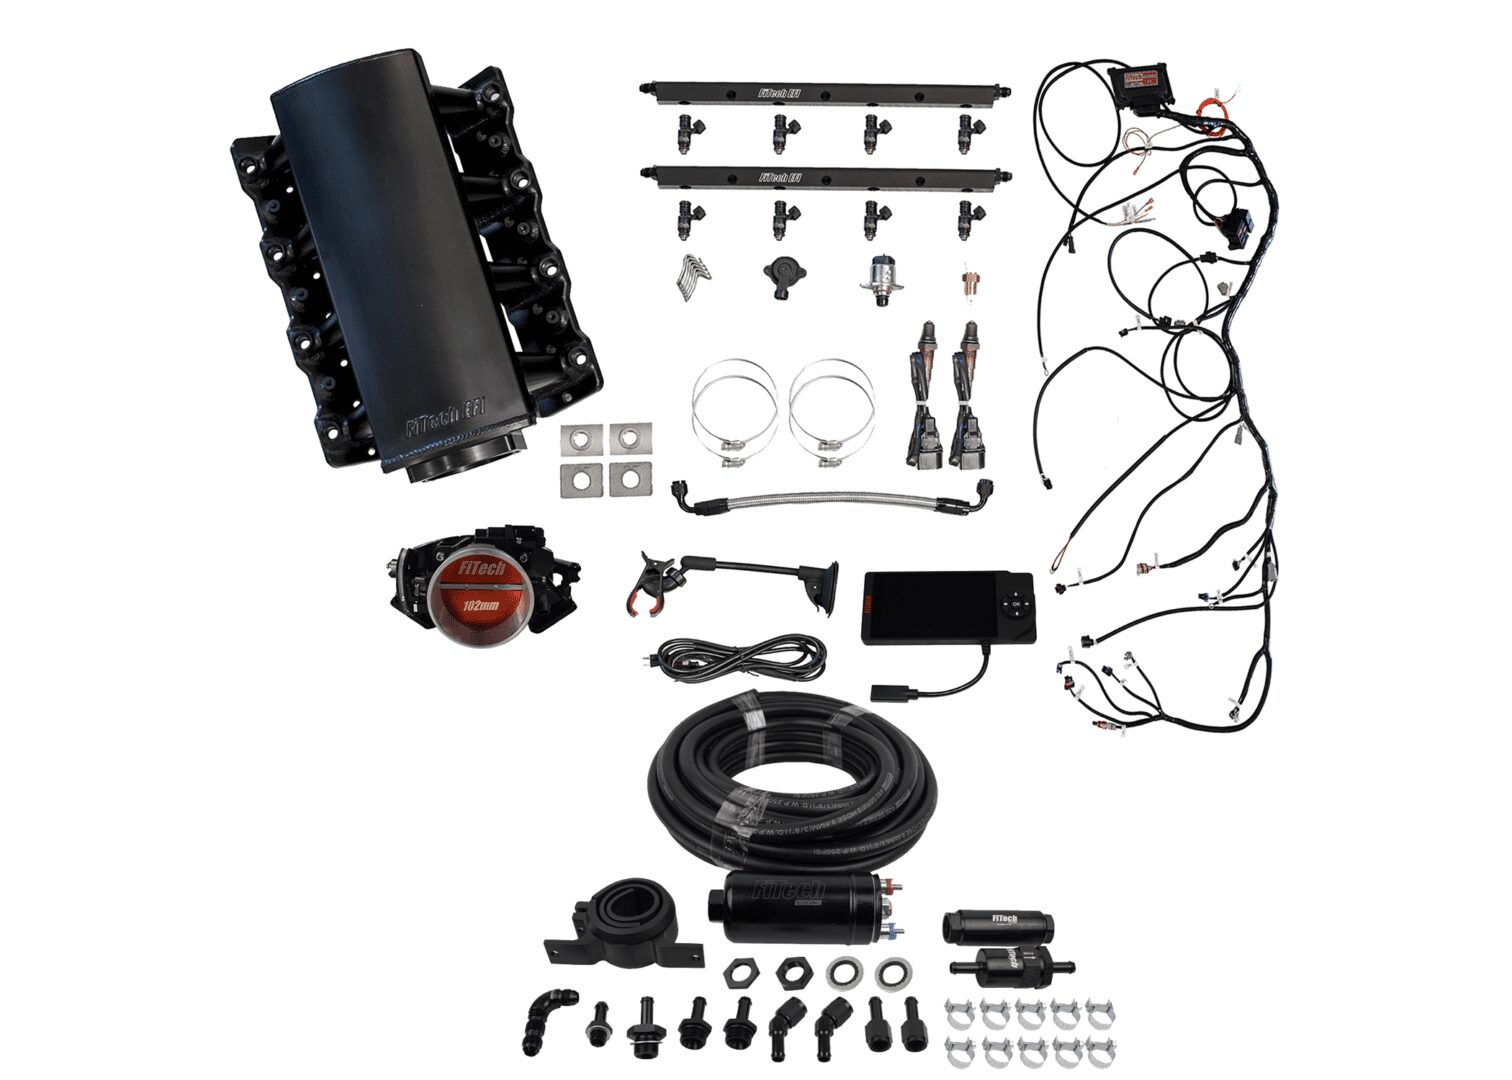 71003Ultimate LS1/LS2/LS6 750HP + In-line Fuel Pump Master Kit - FiTech Fuel  Injection